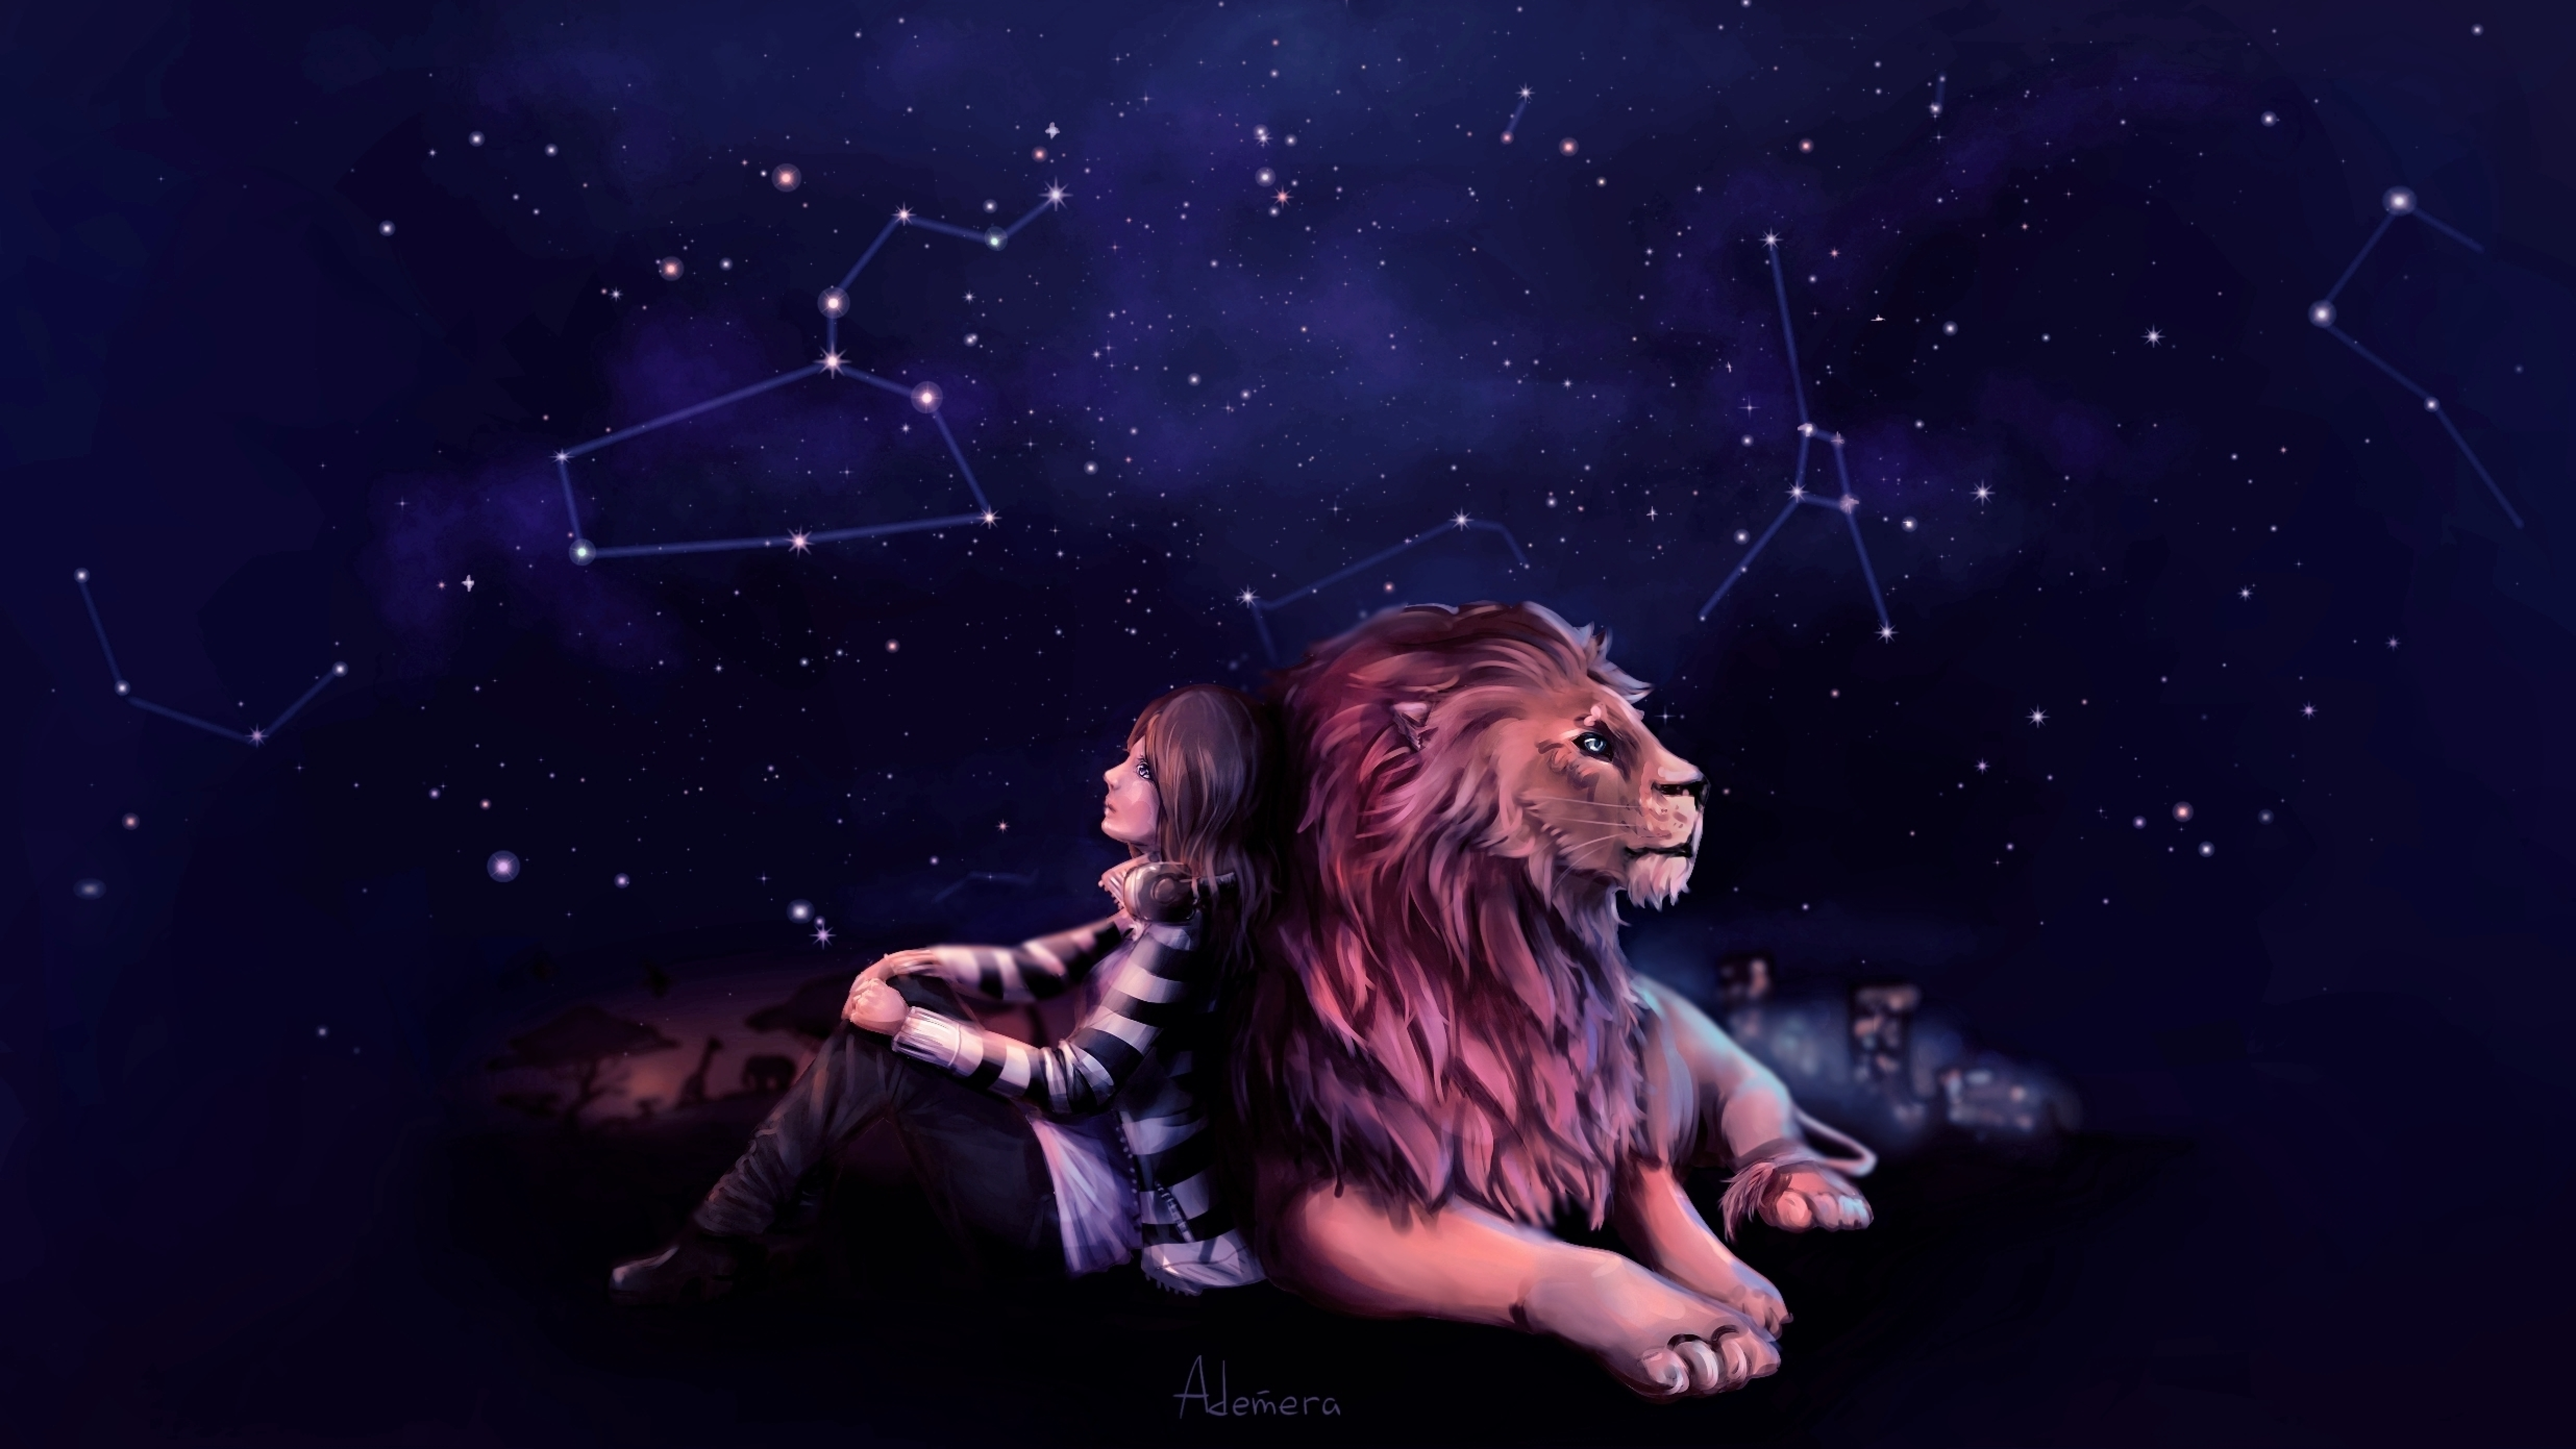 7680x4321 Girl Dreaming With Lion 7680x4321 Resolution Wallpaper, HD  Fantasy 4K Wallpapers, Images, Photos and Background - Wallpapers Den